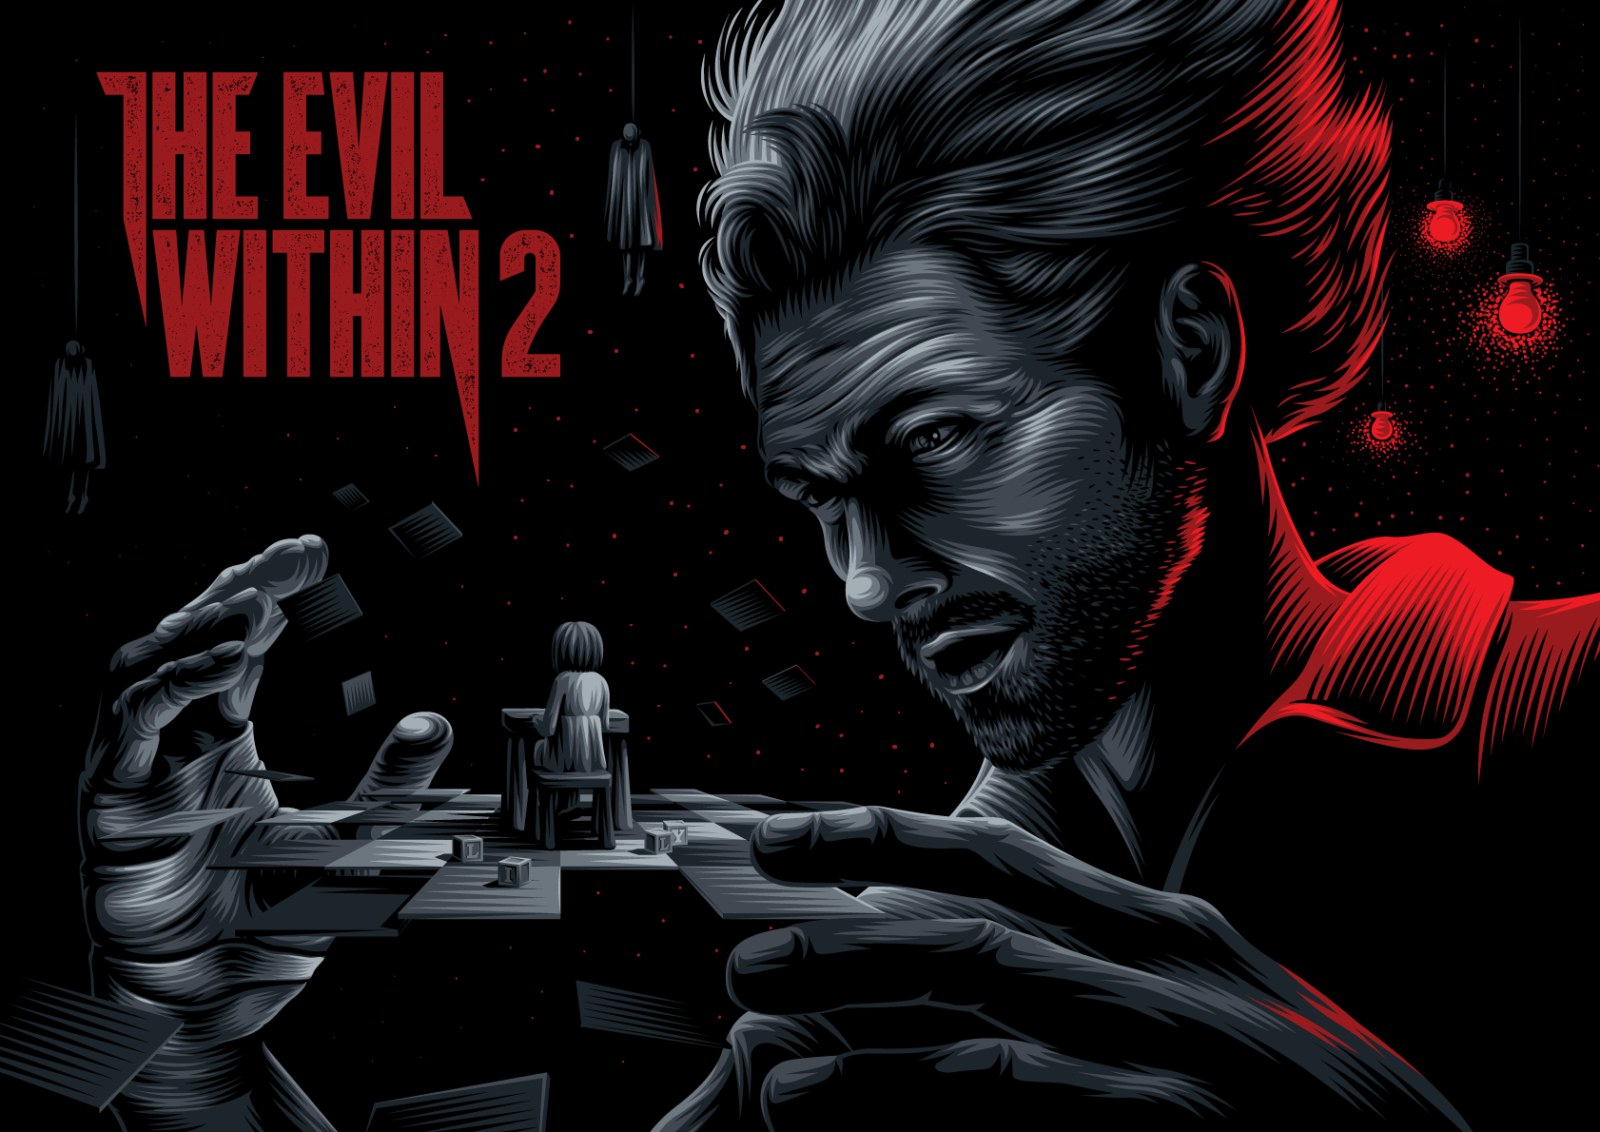 the-evil-within-2-aleksey-rico-posterspy